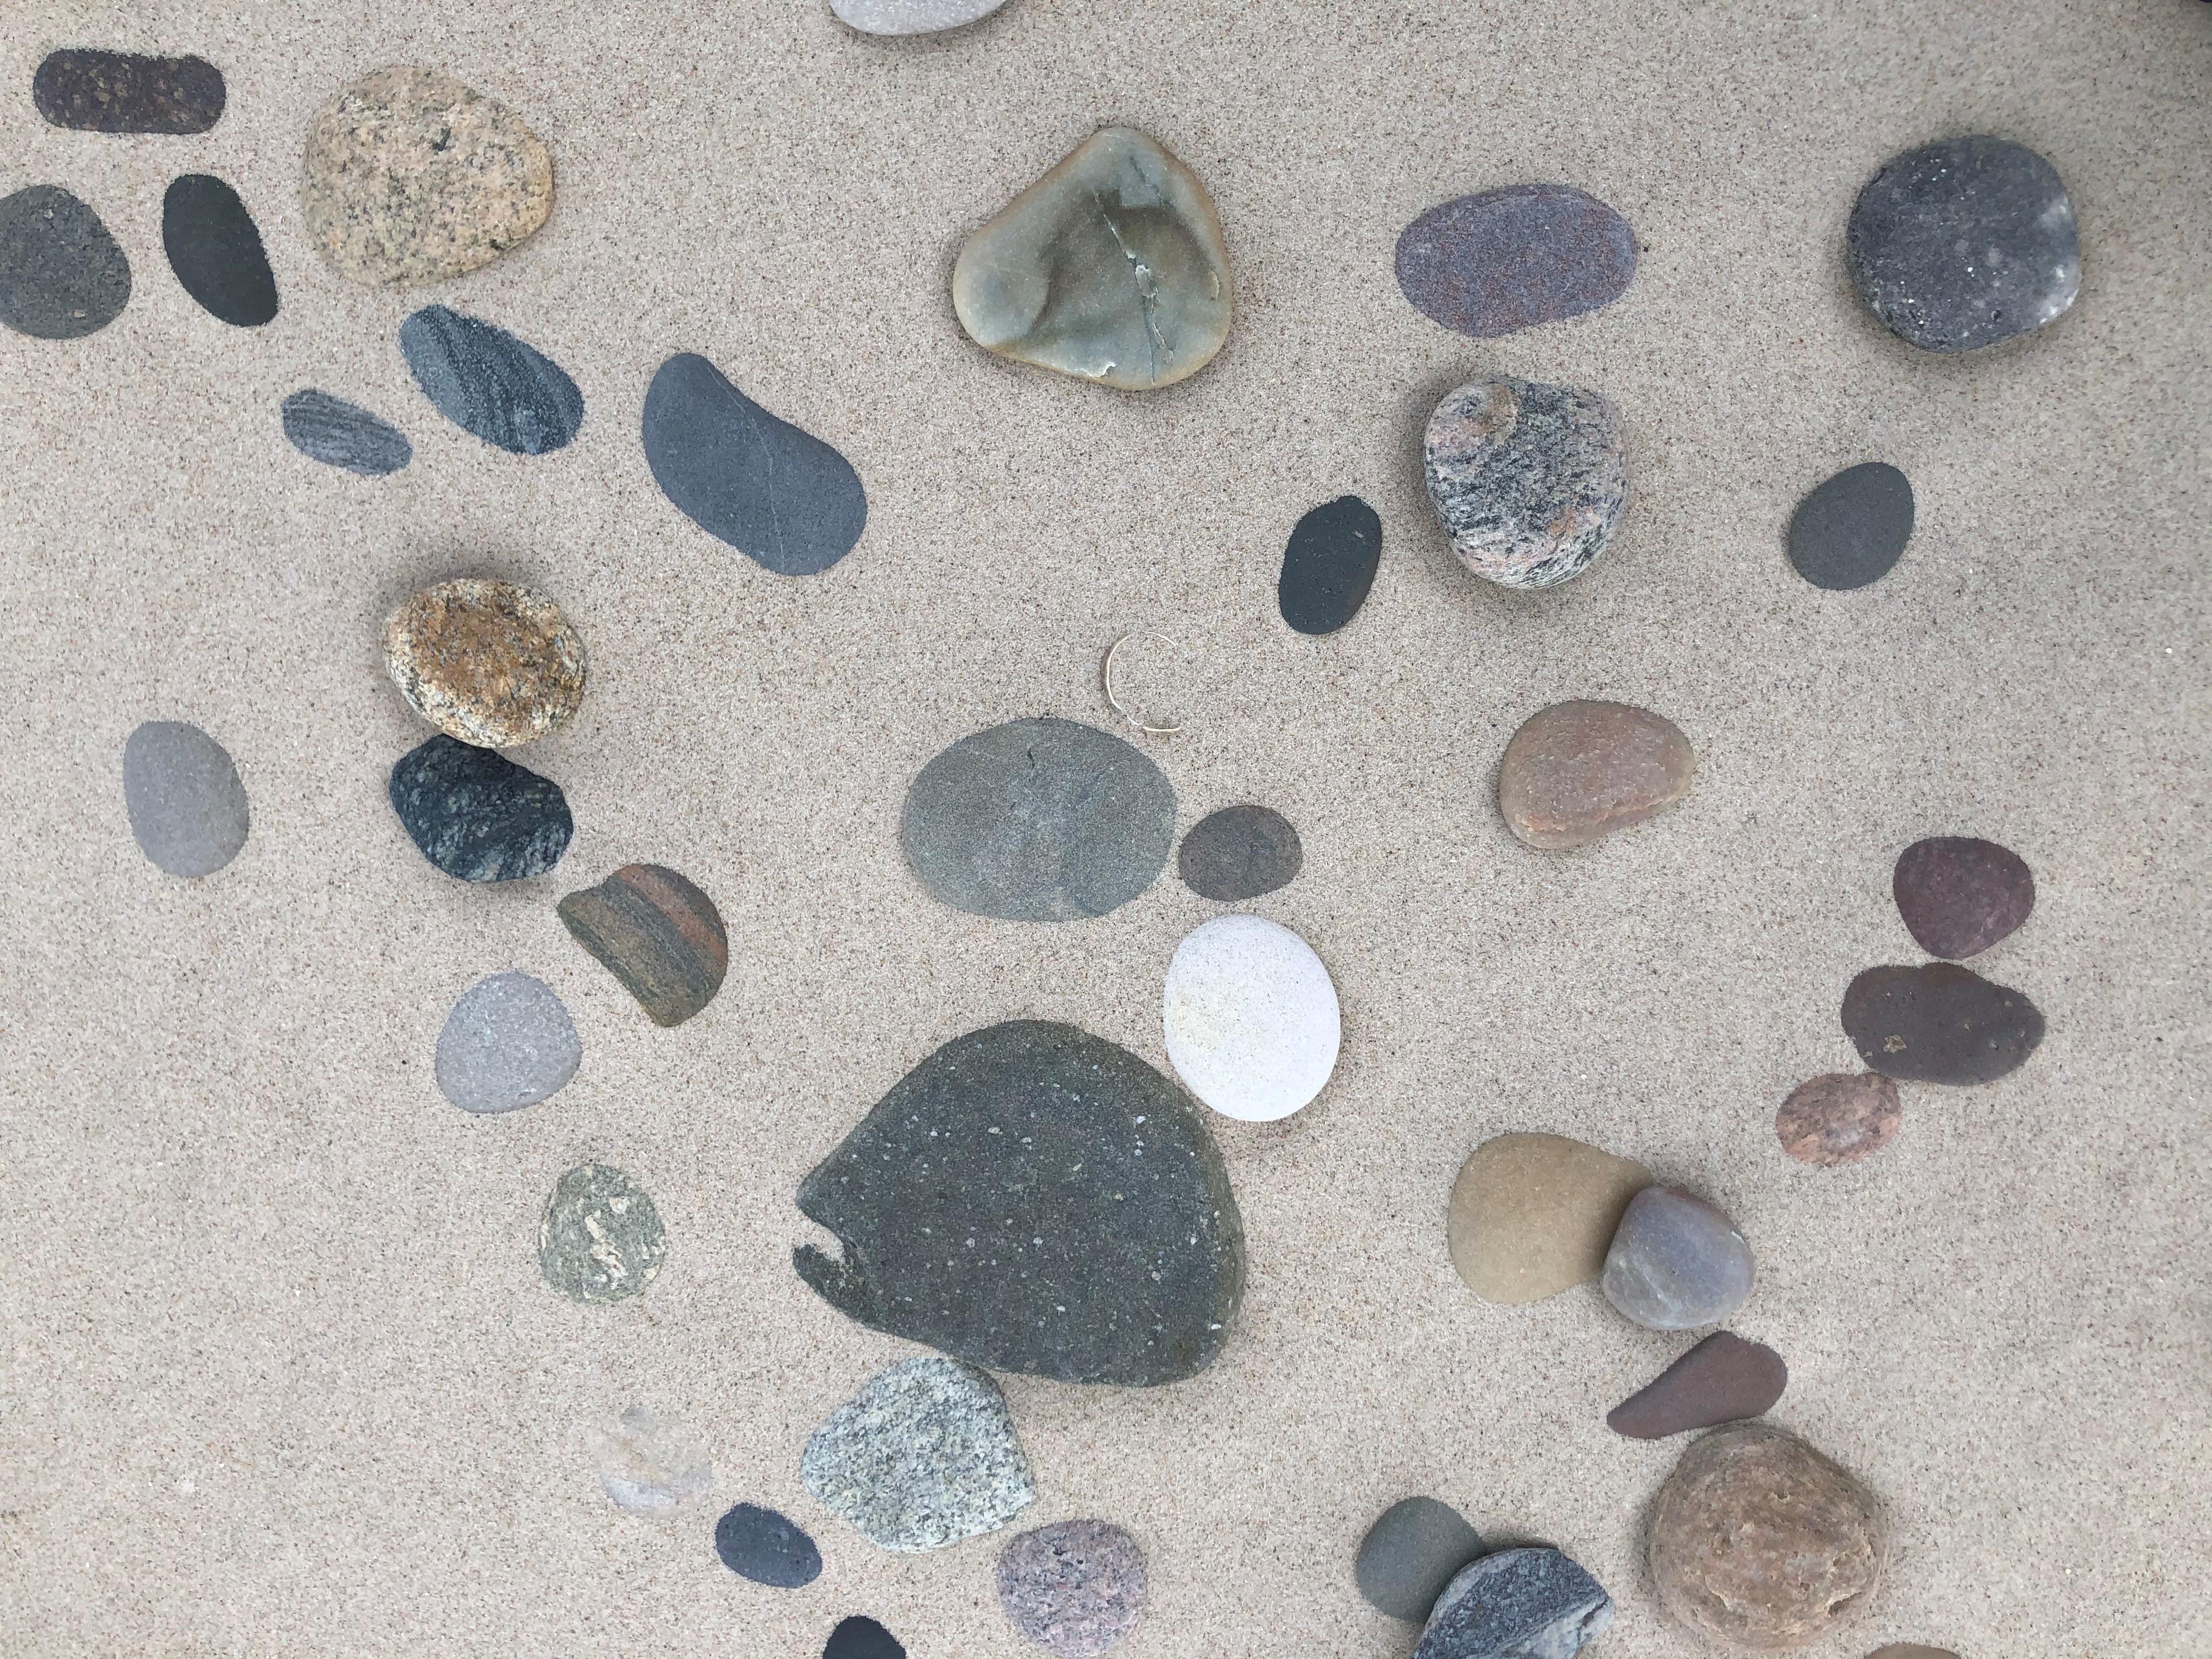 [Translate to English:] Photo of stones on a beach by Maj Thimm Carlsen